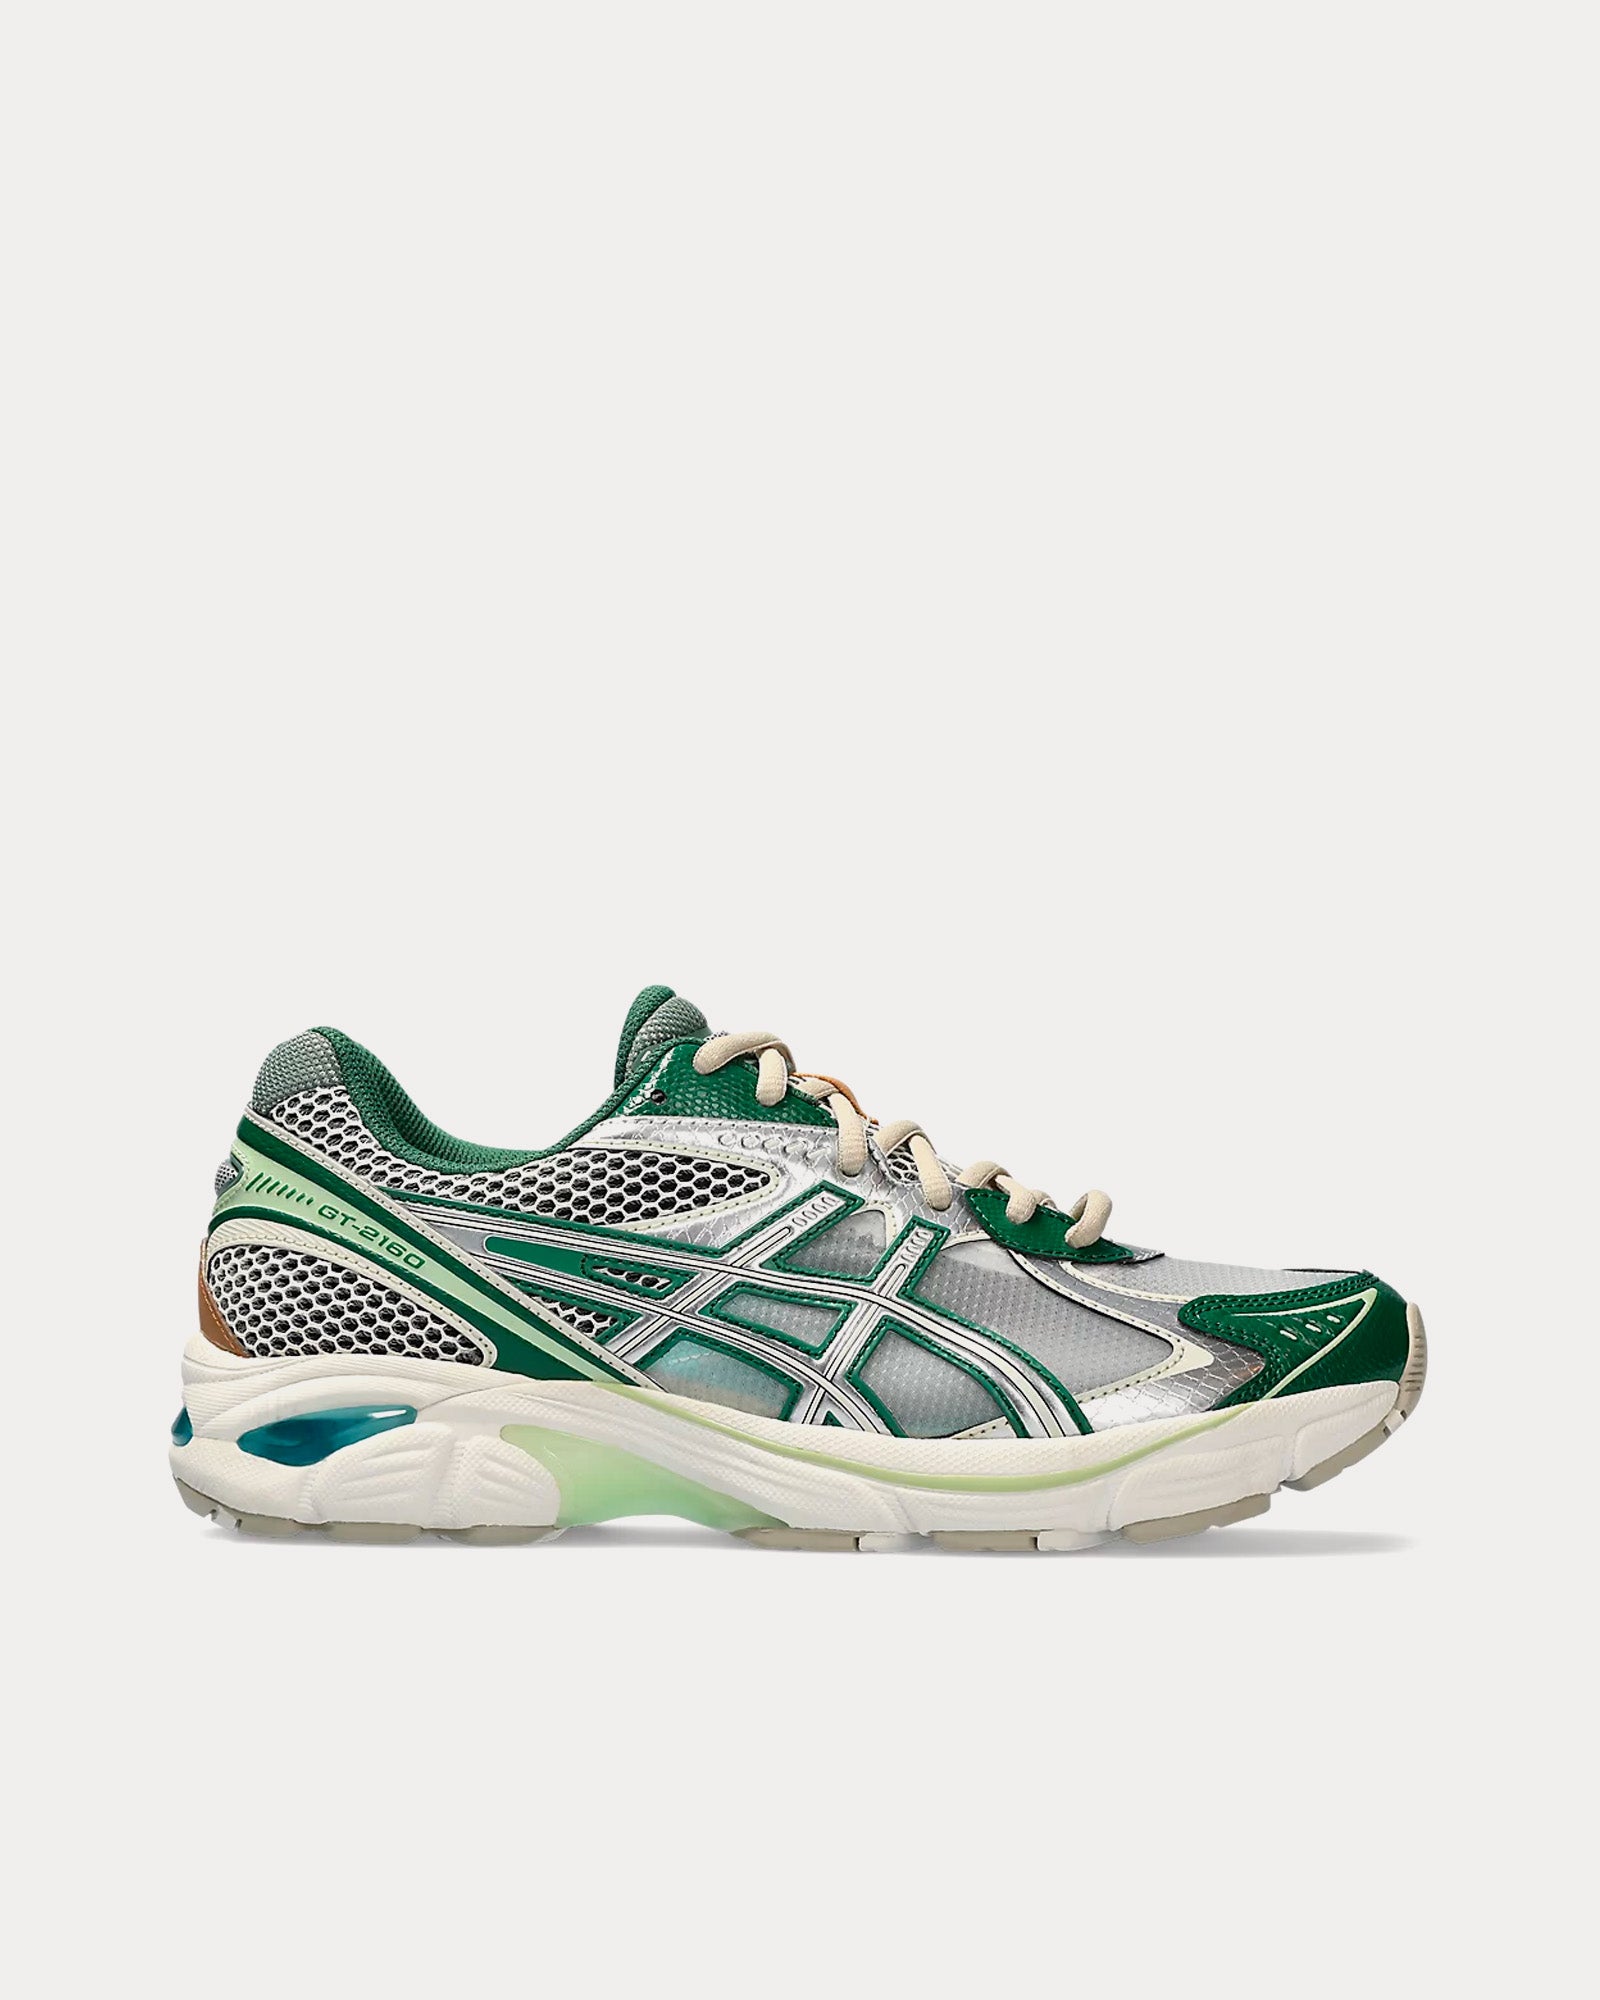 Asics x Above the Clouds - GT-2160 Cream / Shamrock Green Low Top Sneakers